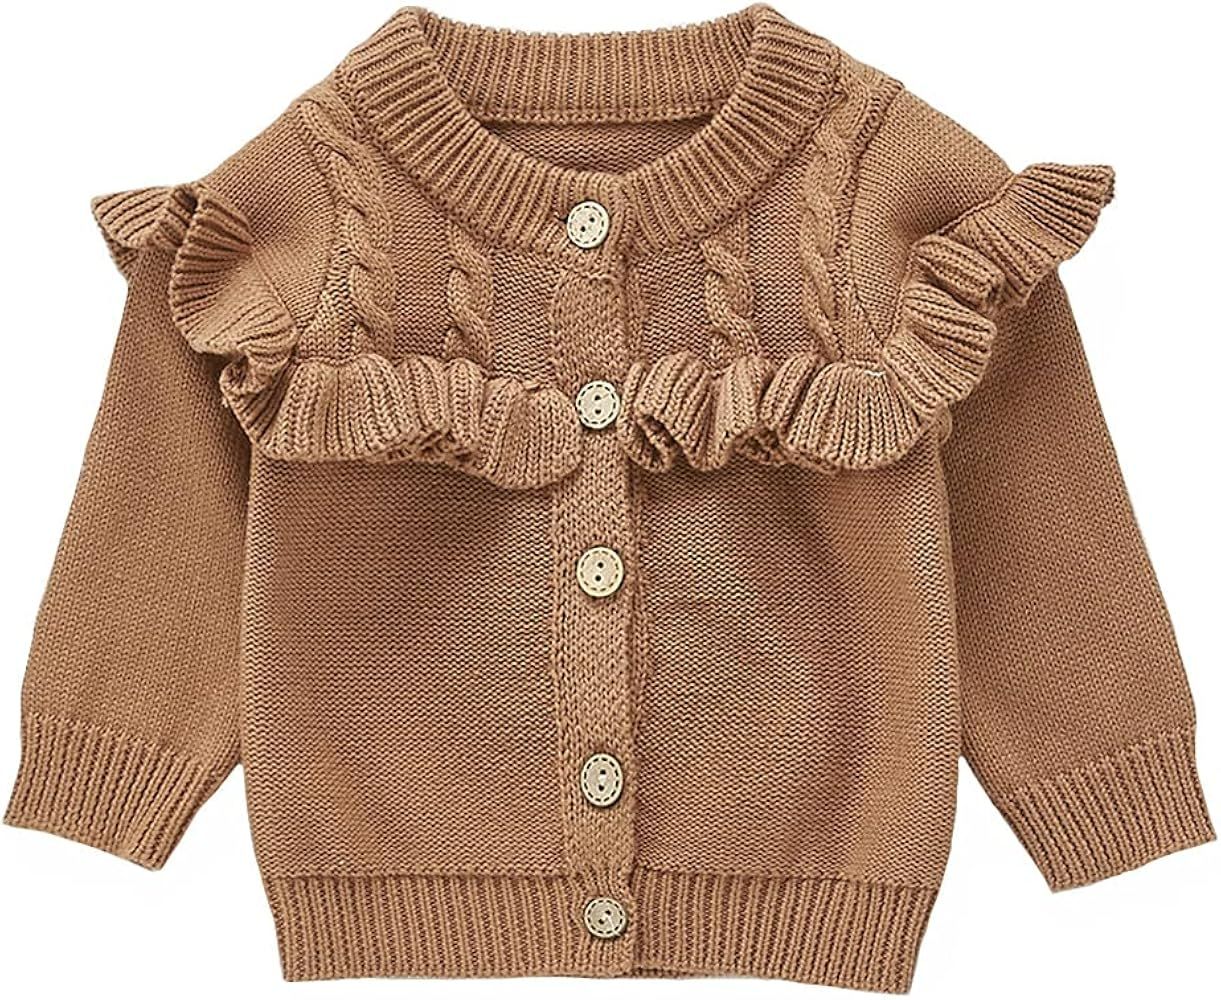 Simplee kids Baby Sweater Cable Knitting Thick Baby Unisex Cardigan for Autumn Fall 3-24 Months | Amazon (US)